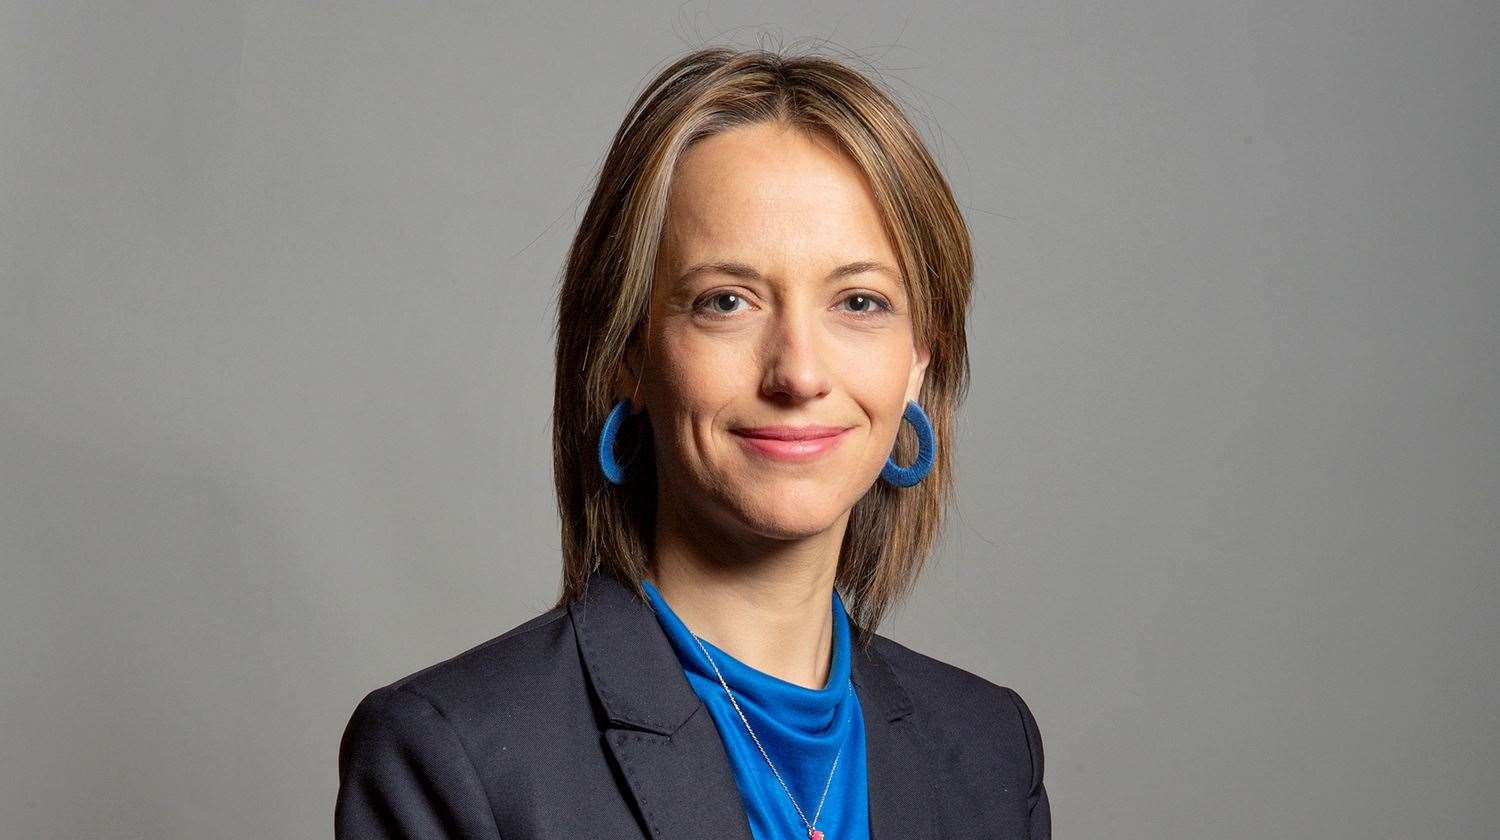 MP Helen Whately is critical of the decision to implement Operation Brock ahead of the Easter Holidays